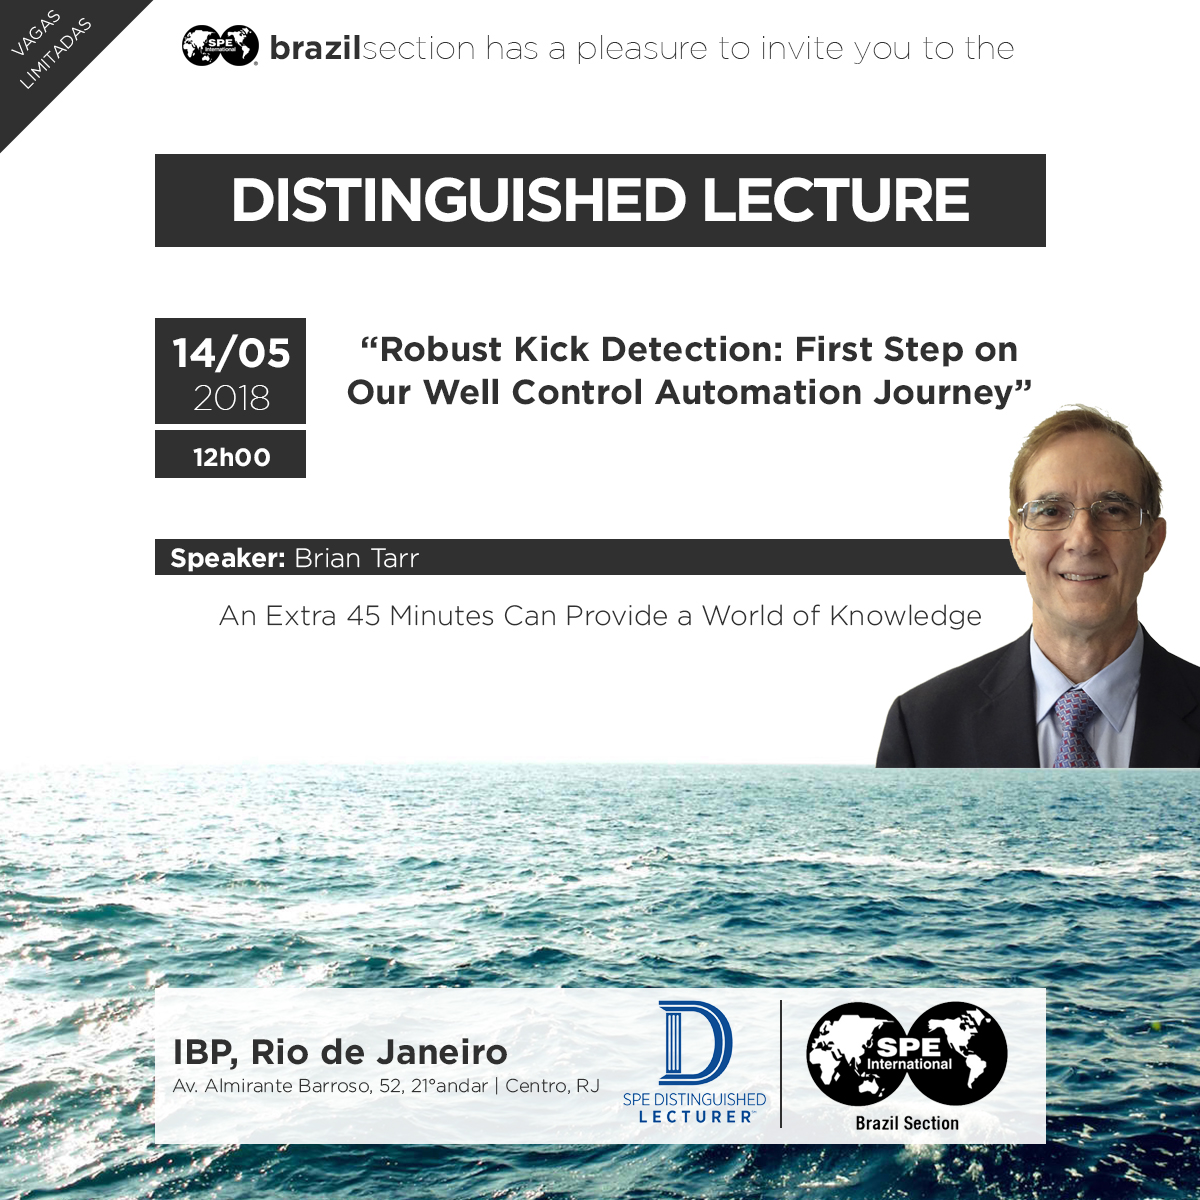 DISTINGUISHED LECTURER: ‘Robust Kick Detection: First Step on Our Well Control Automation Journey’